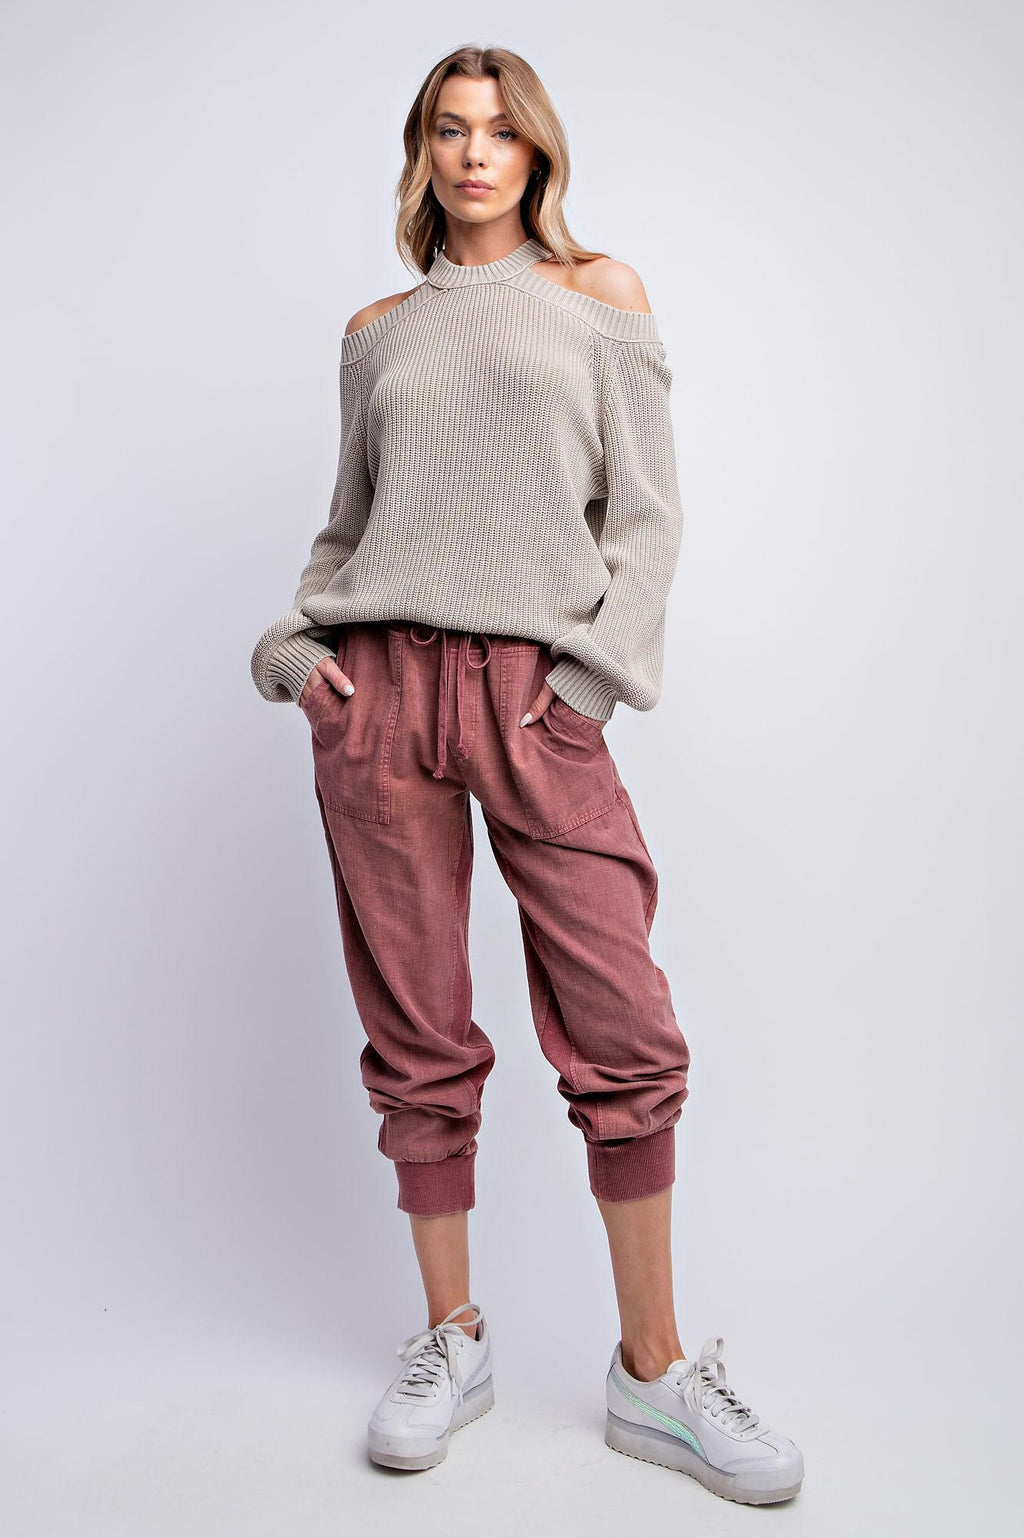 Faded Plum Mineral Washed Jogger Pants by Easel